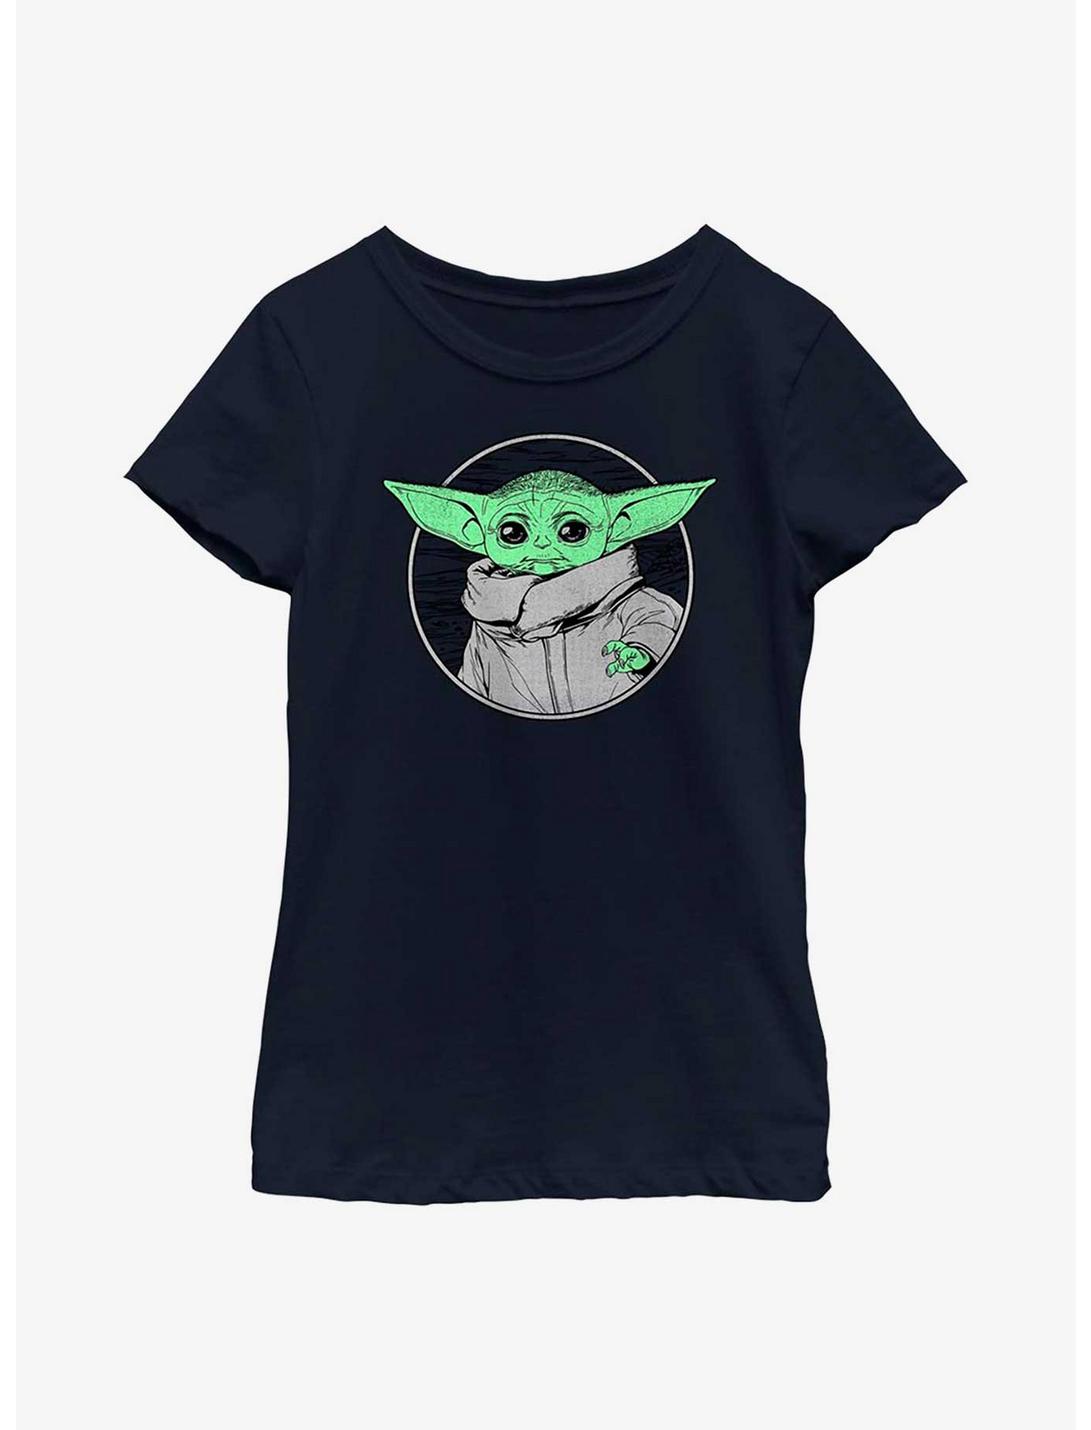 Star Wars The Mandalorian The Child Force Youth Girls T-Shirt, NAVY, hi-res